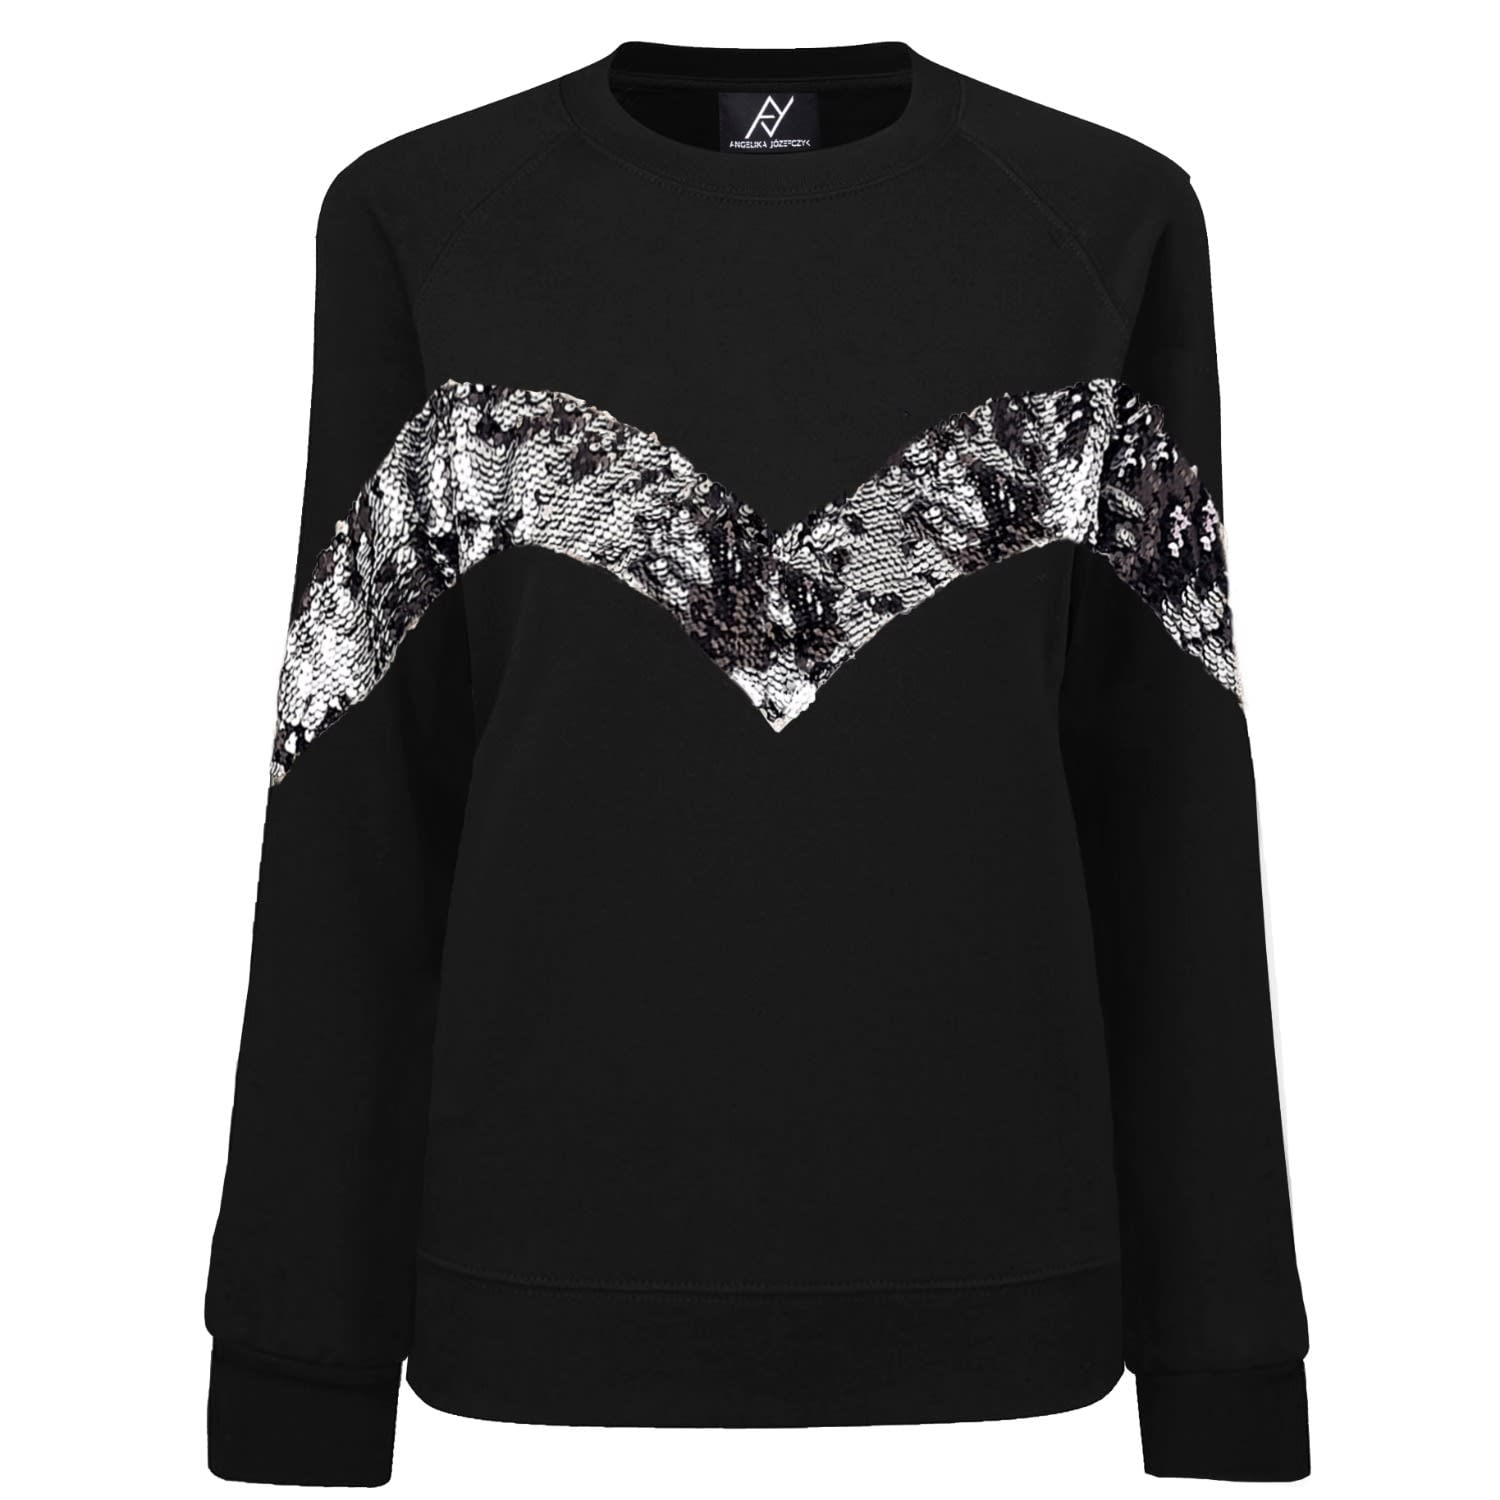 Angelika Jozefczyk Elegant Black Jumper With Silver Sequins ($95)